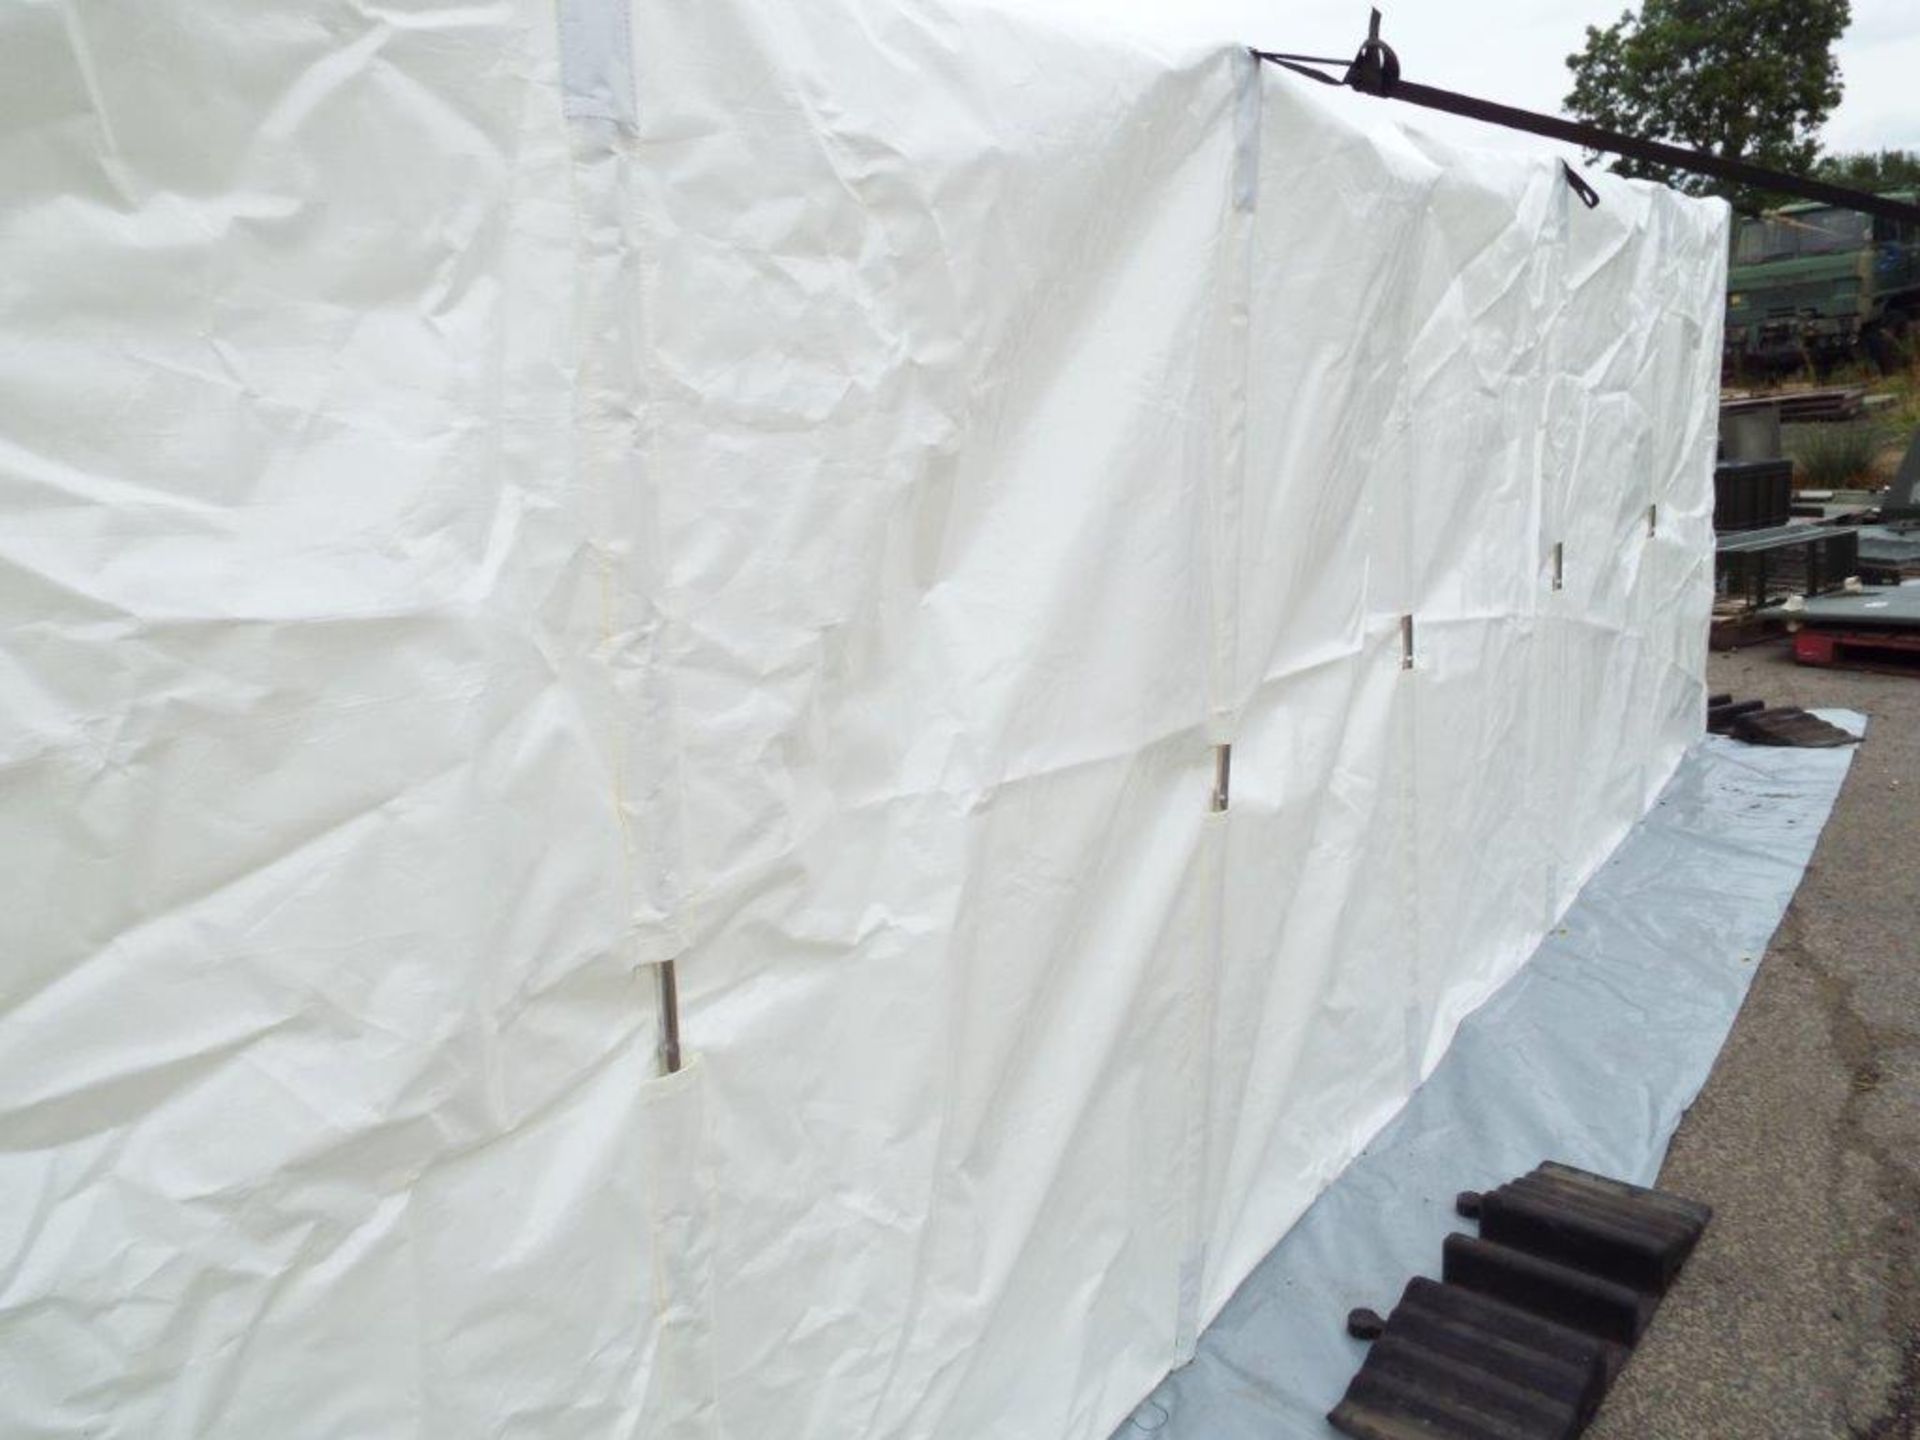 Unissued 8mx4m Inflatable Decontamination/Party Tent - Image 5 of 15